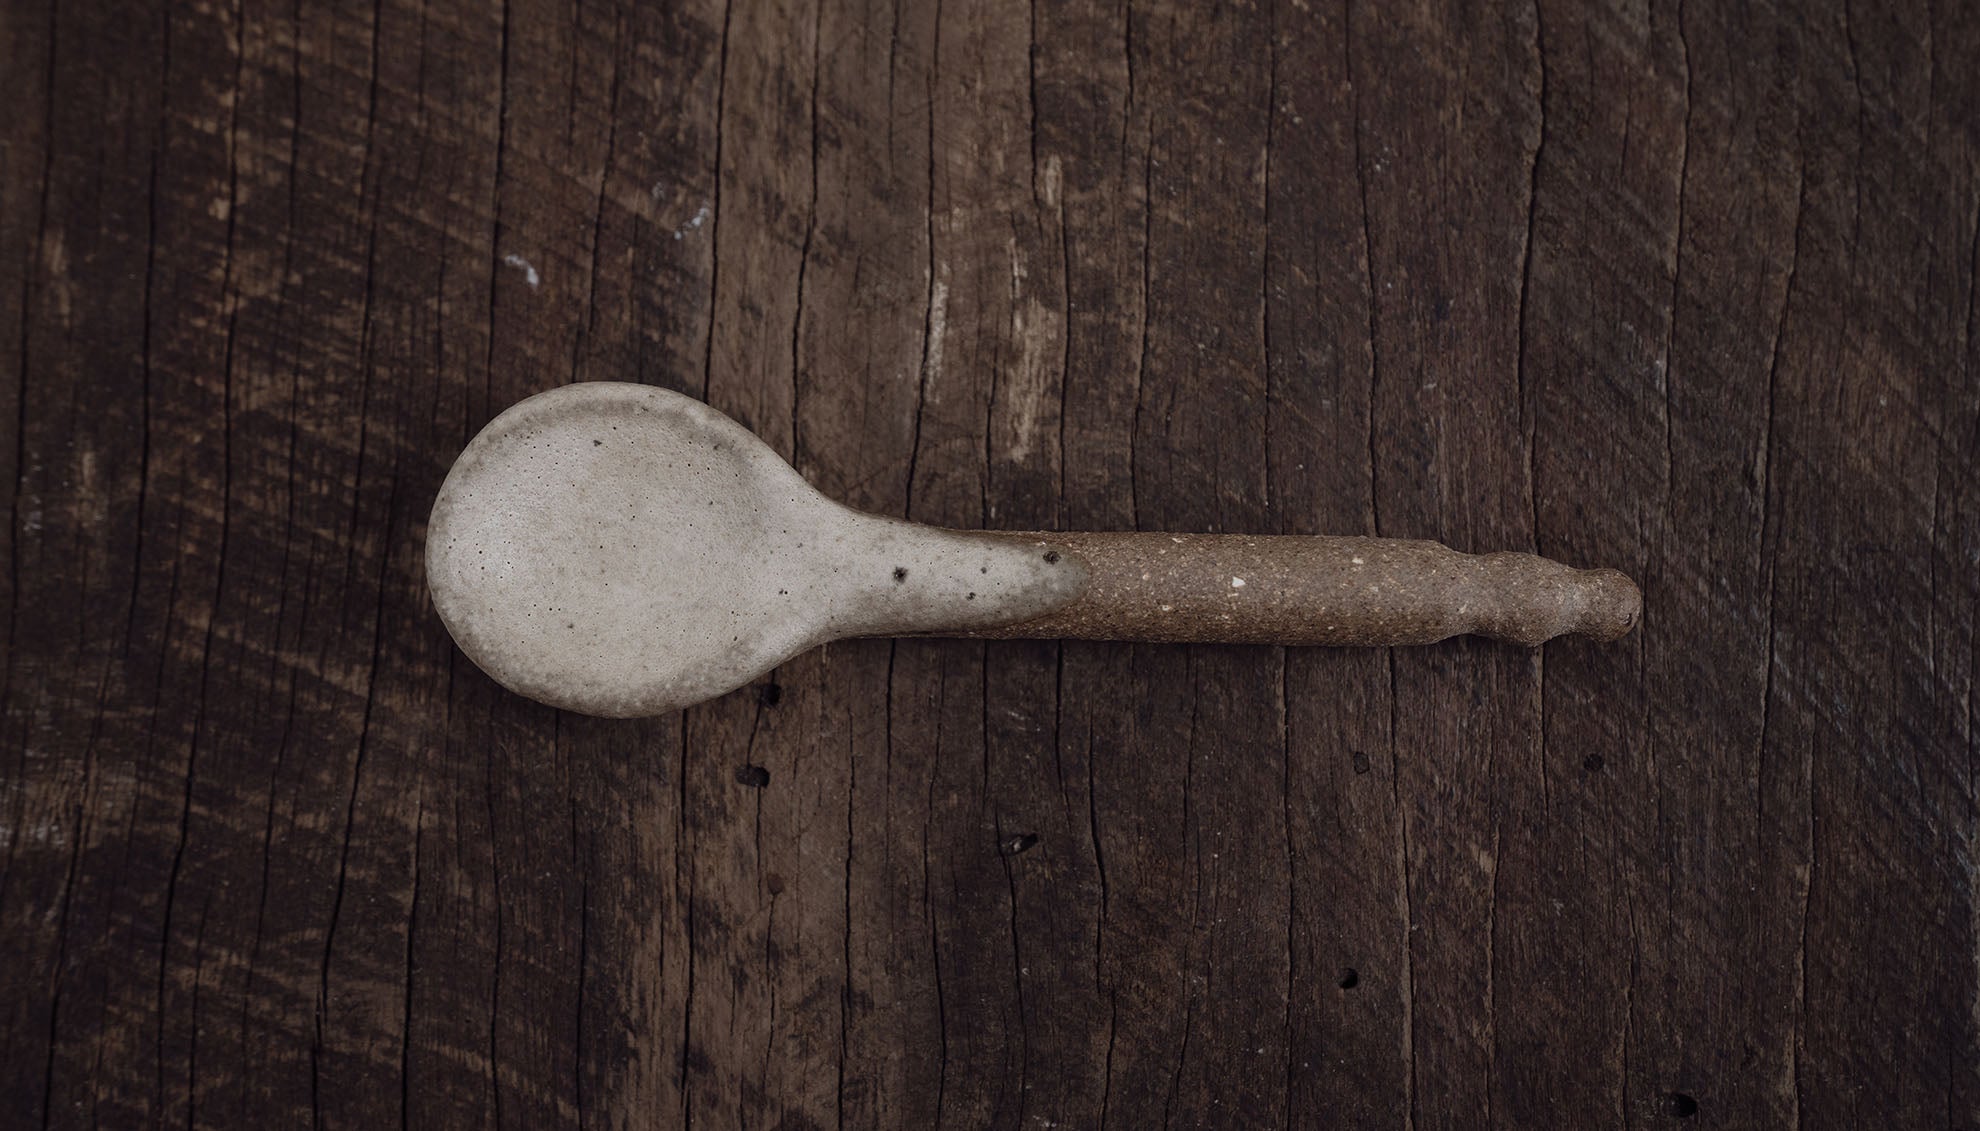 Ball tipped spoon